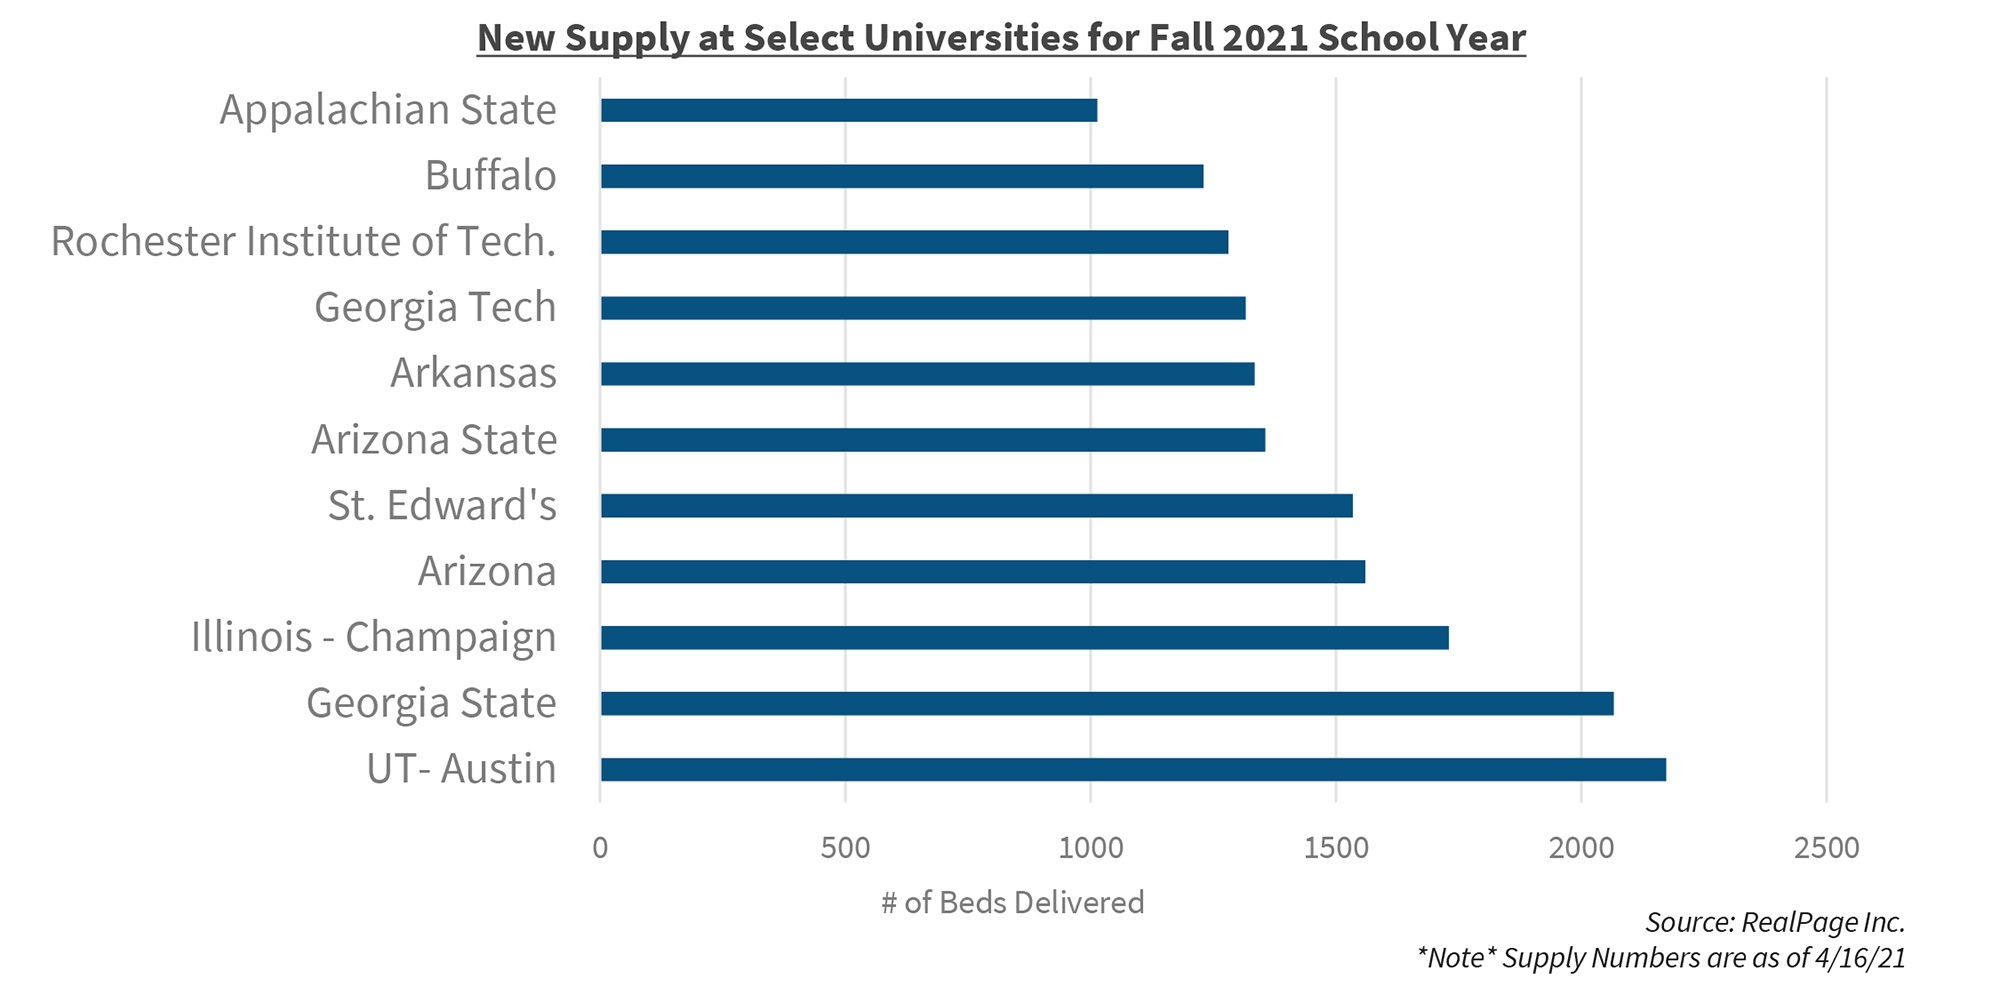 New Supply at Select Universities for Fall 2021 School Year